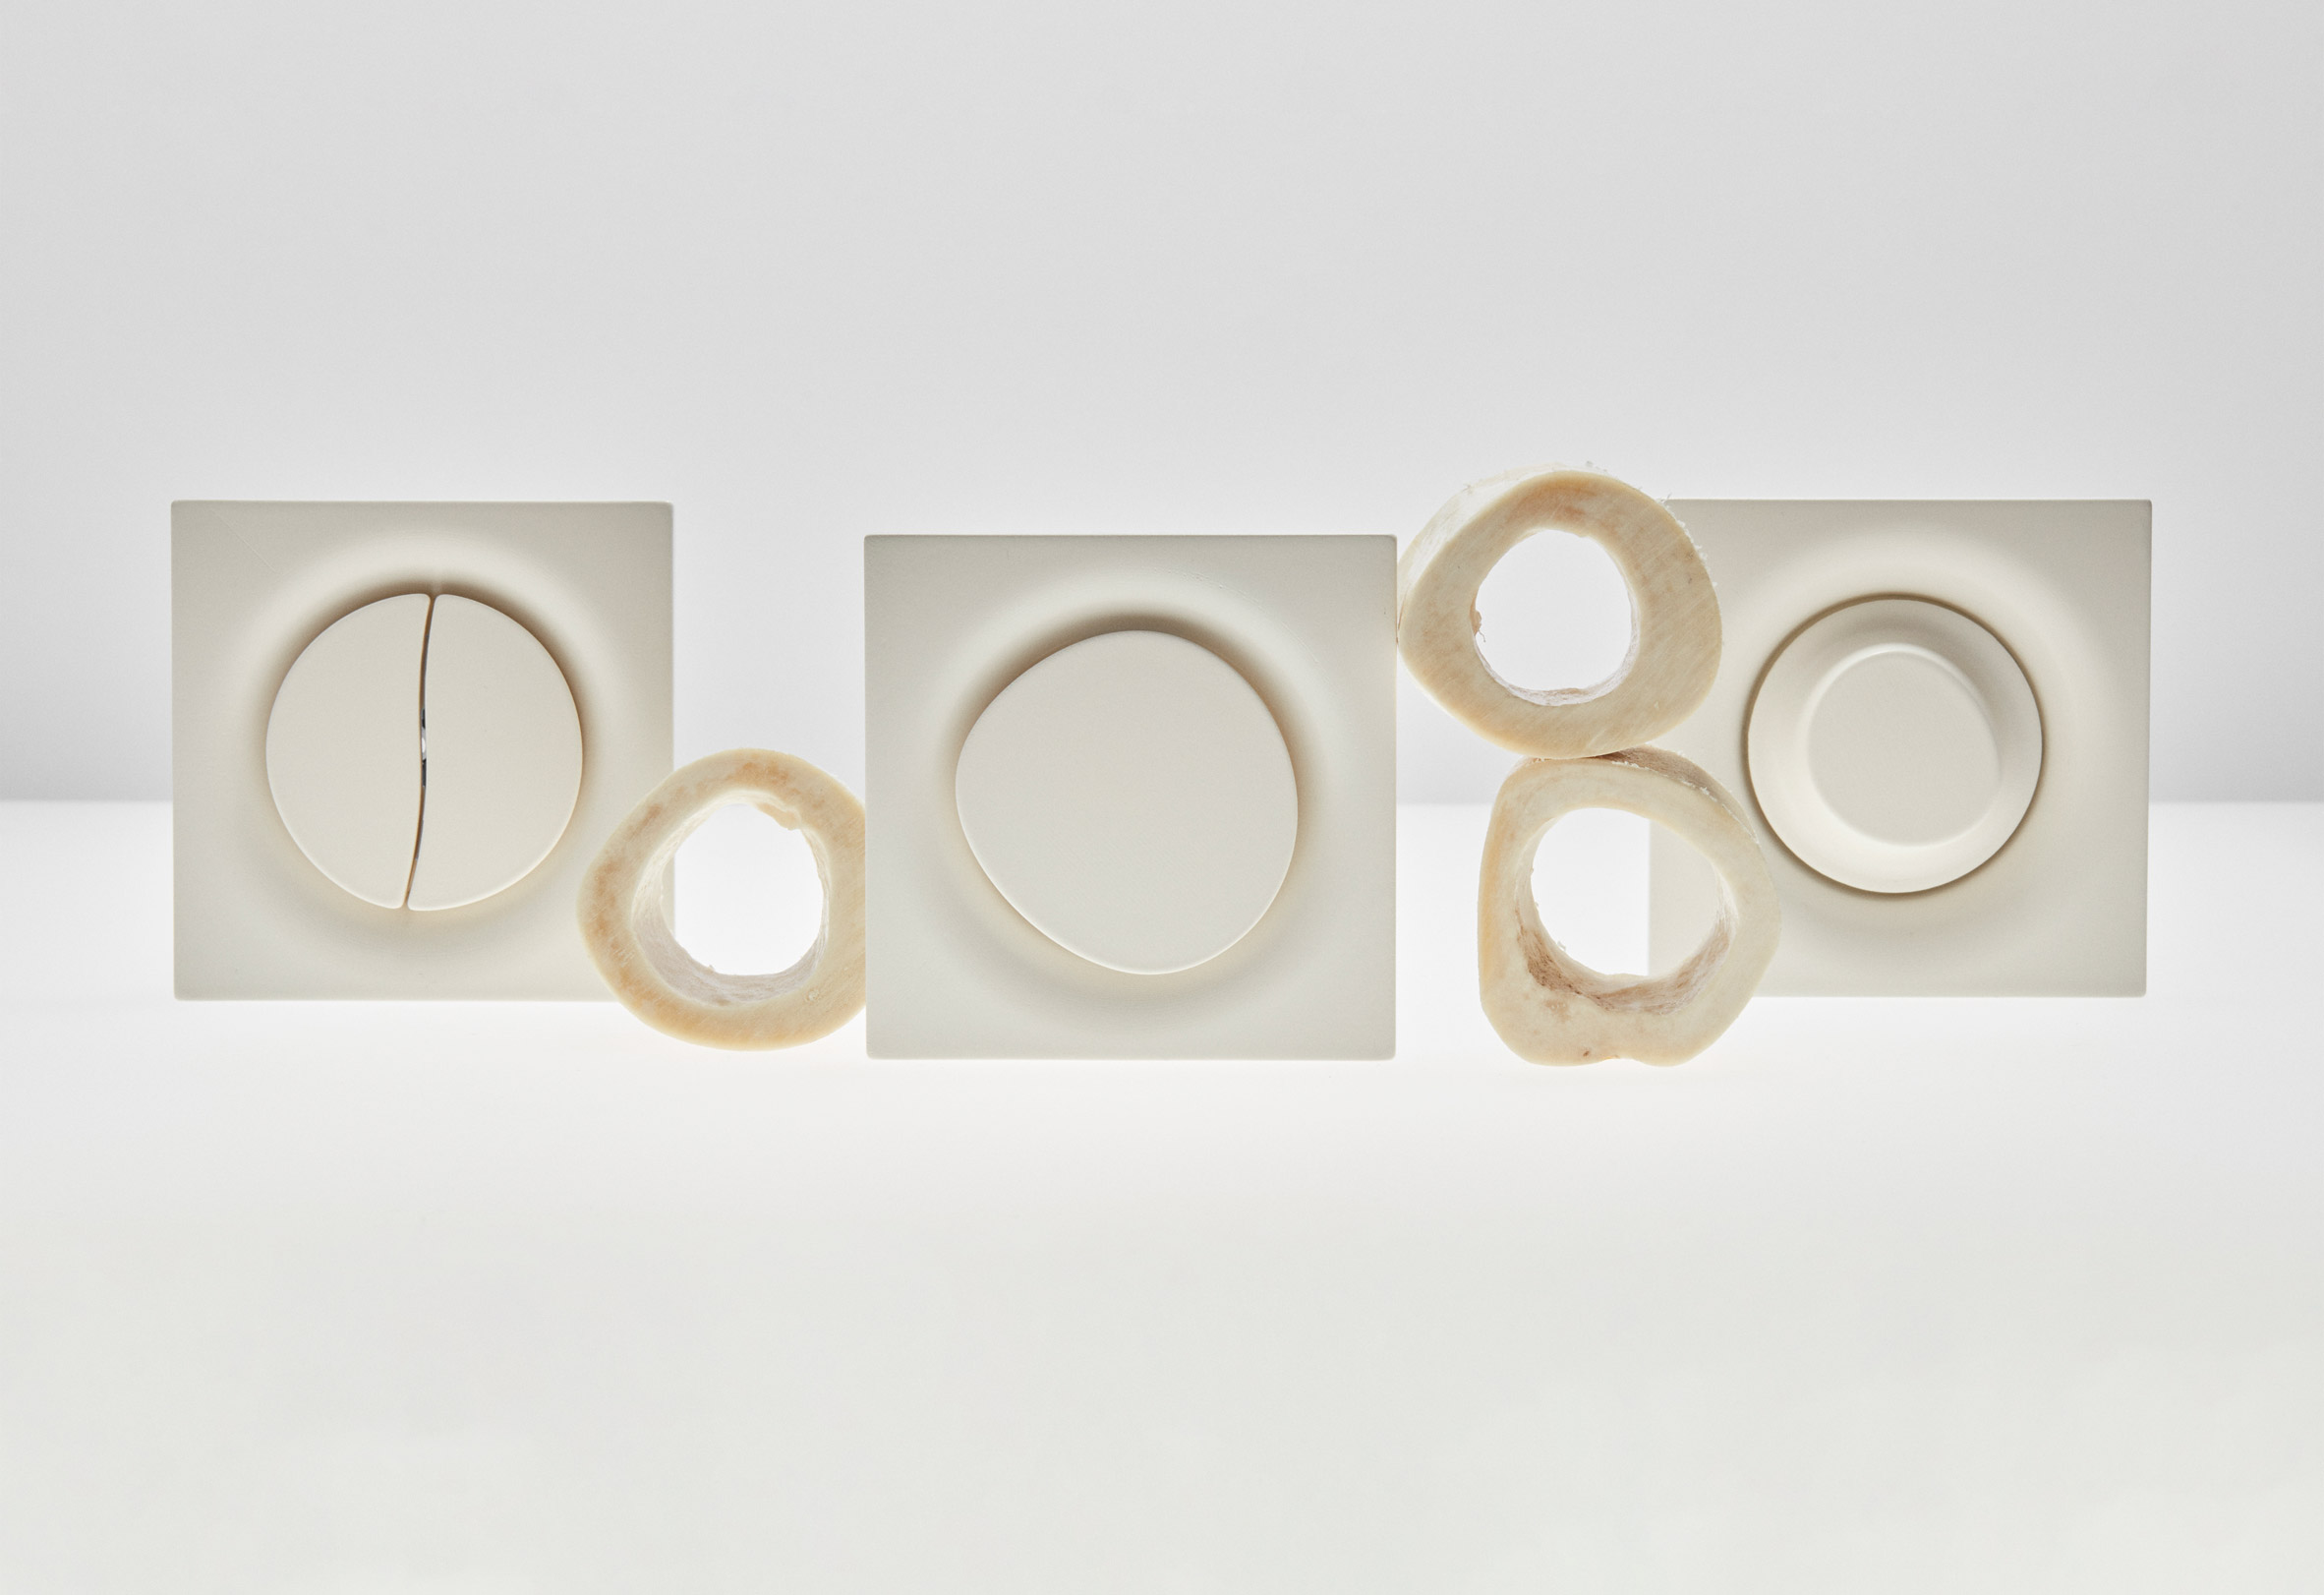 Three organically shaped light switches by Souhaïb Ghanmi next to cross-sectioned bones 